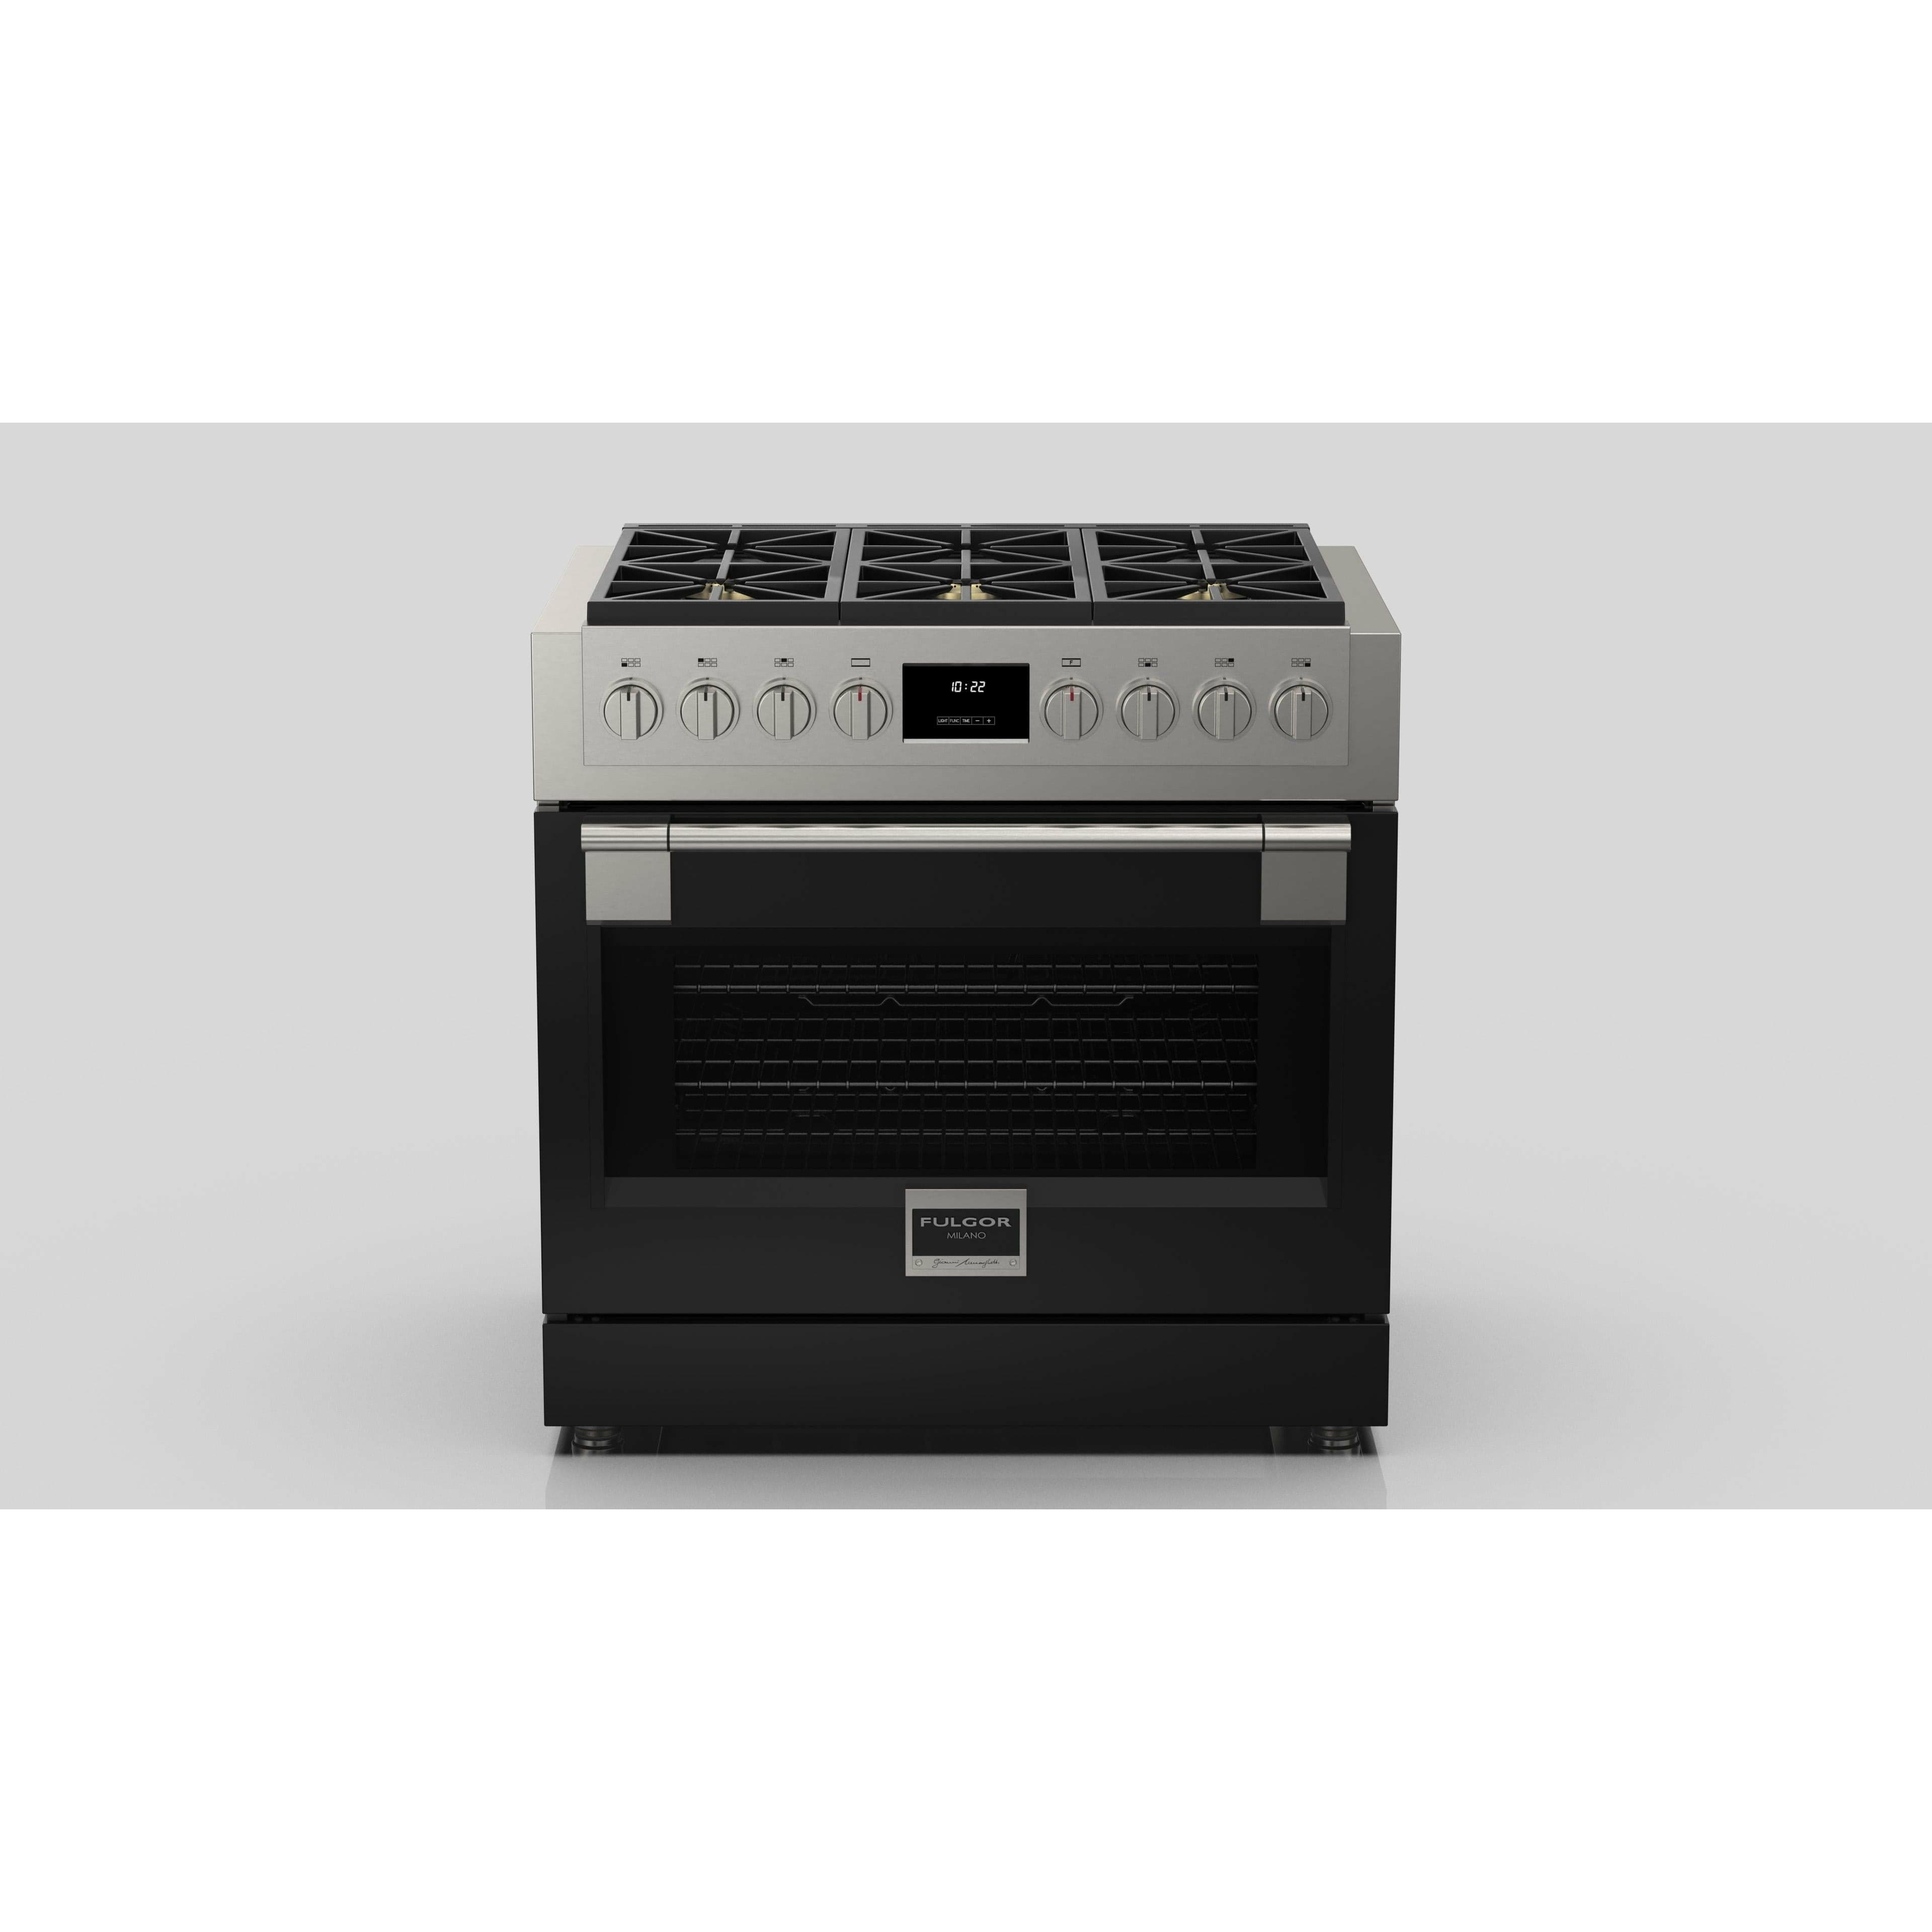 Fulgor Milano 36" Professional Gas Range with 6 Dual-Flame Burners, 5.7 cu. ft. Capacity, Stainless Steel - F6PGR366S2 Ranges PDRKIT36BK Luxury Appliances Direct